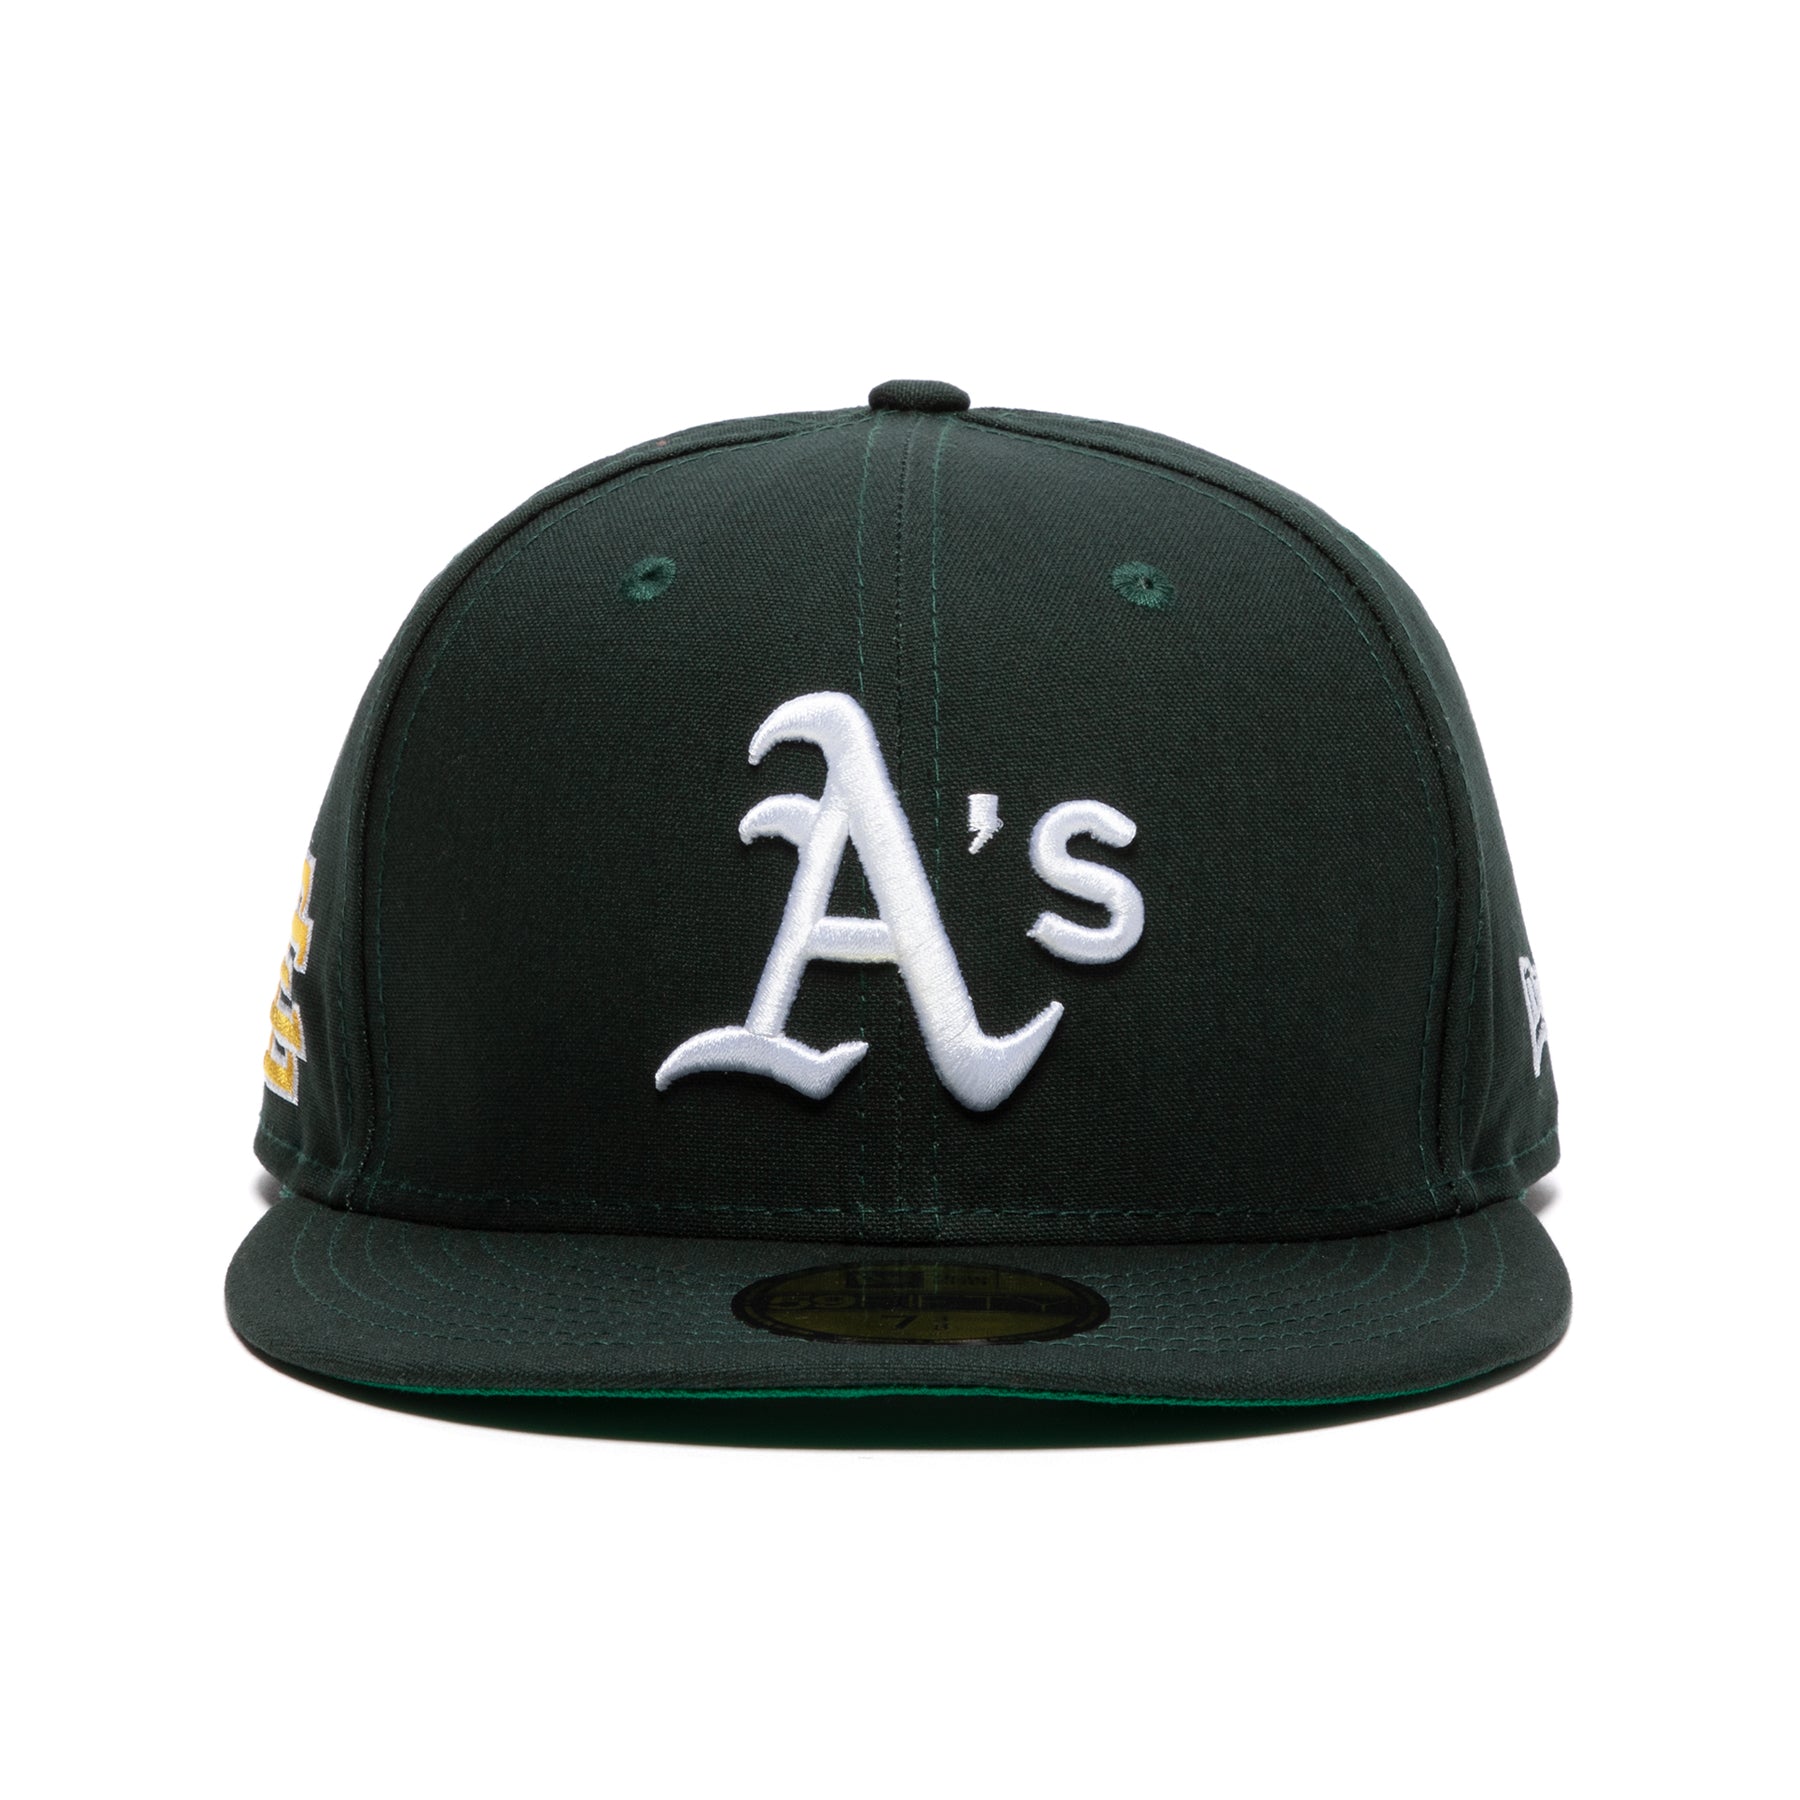 New Era x Eric Emanuel Oakland Athletic Fitted Hat (Dark Green)